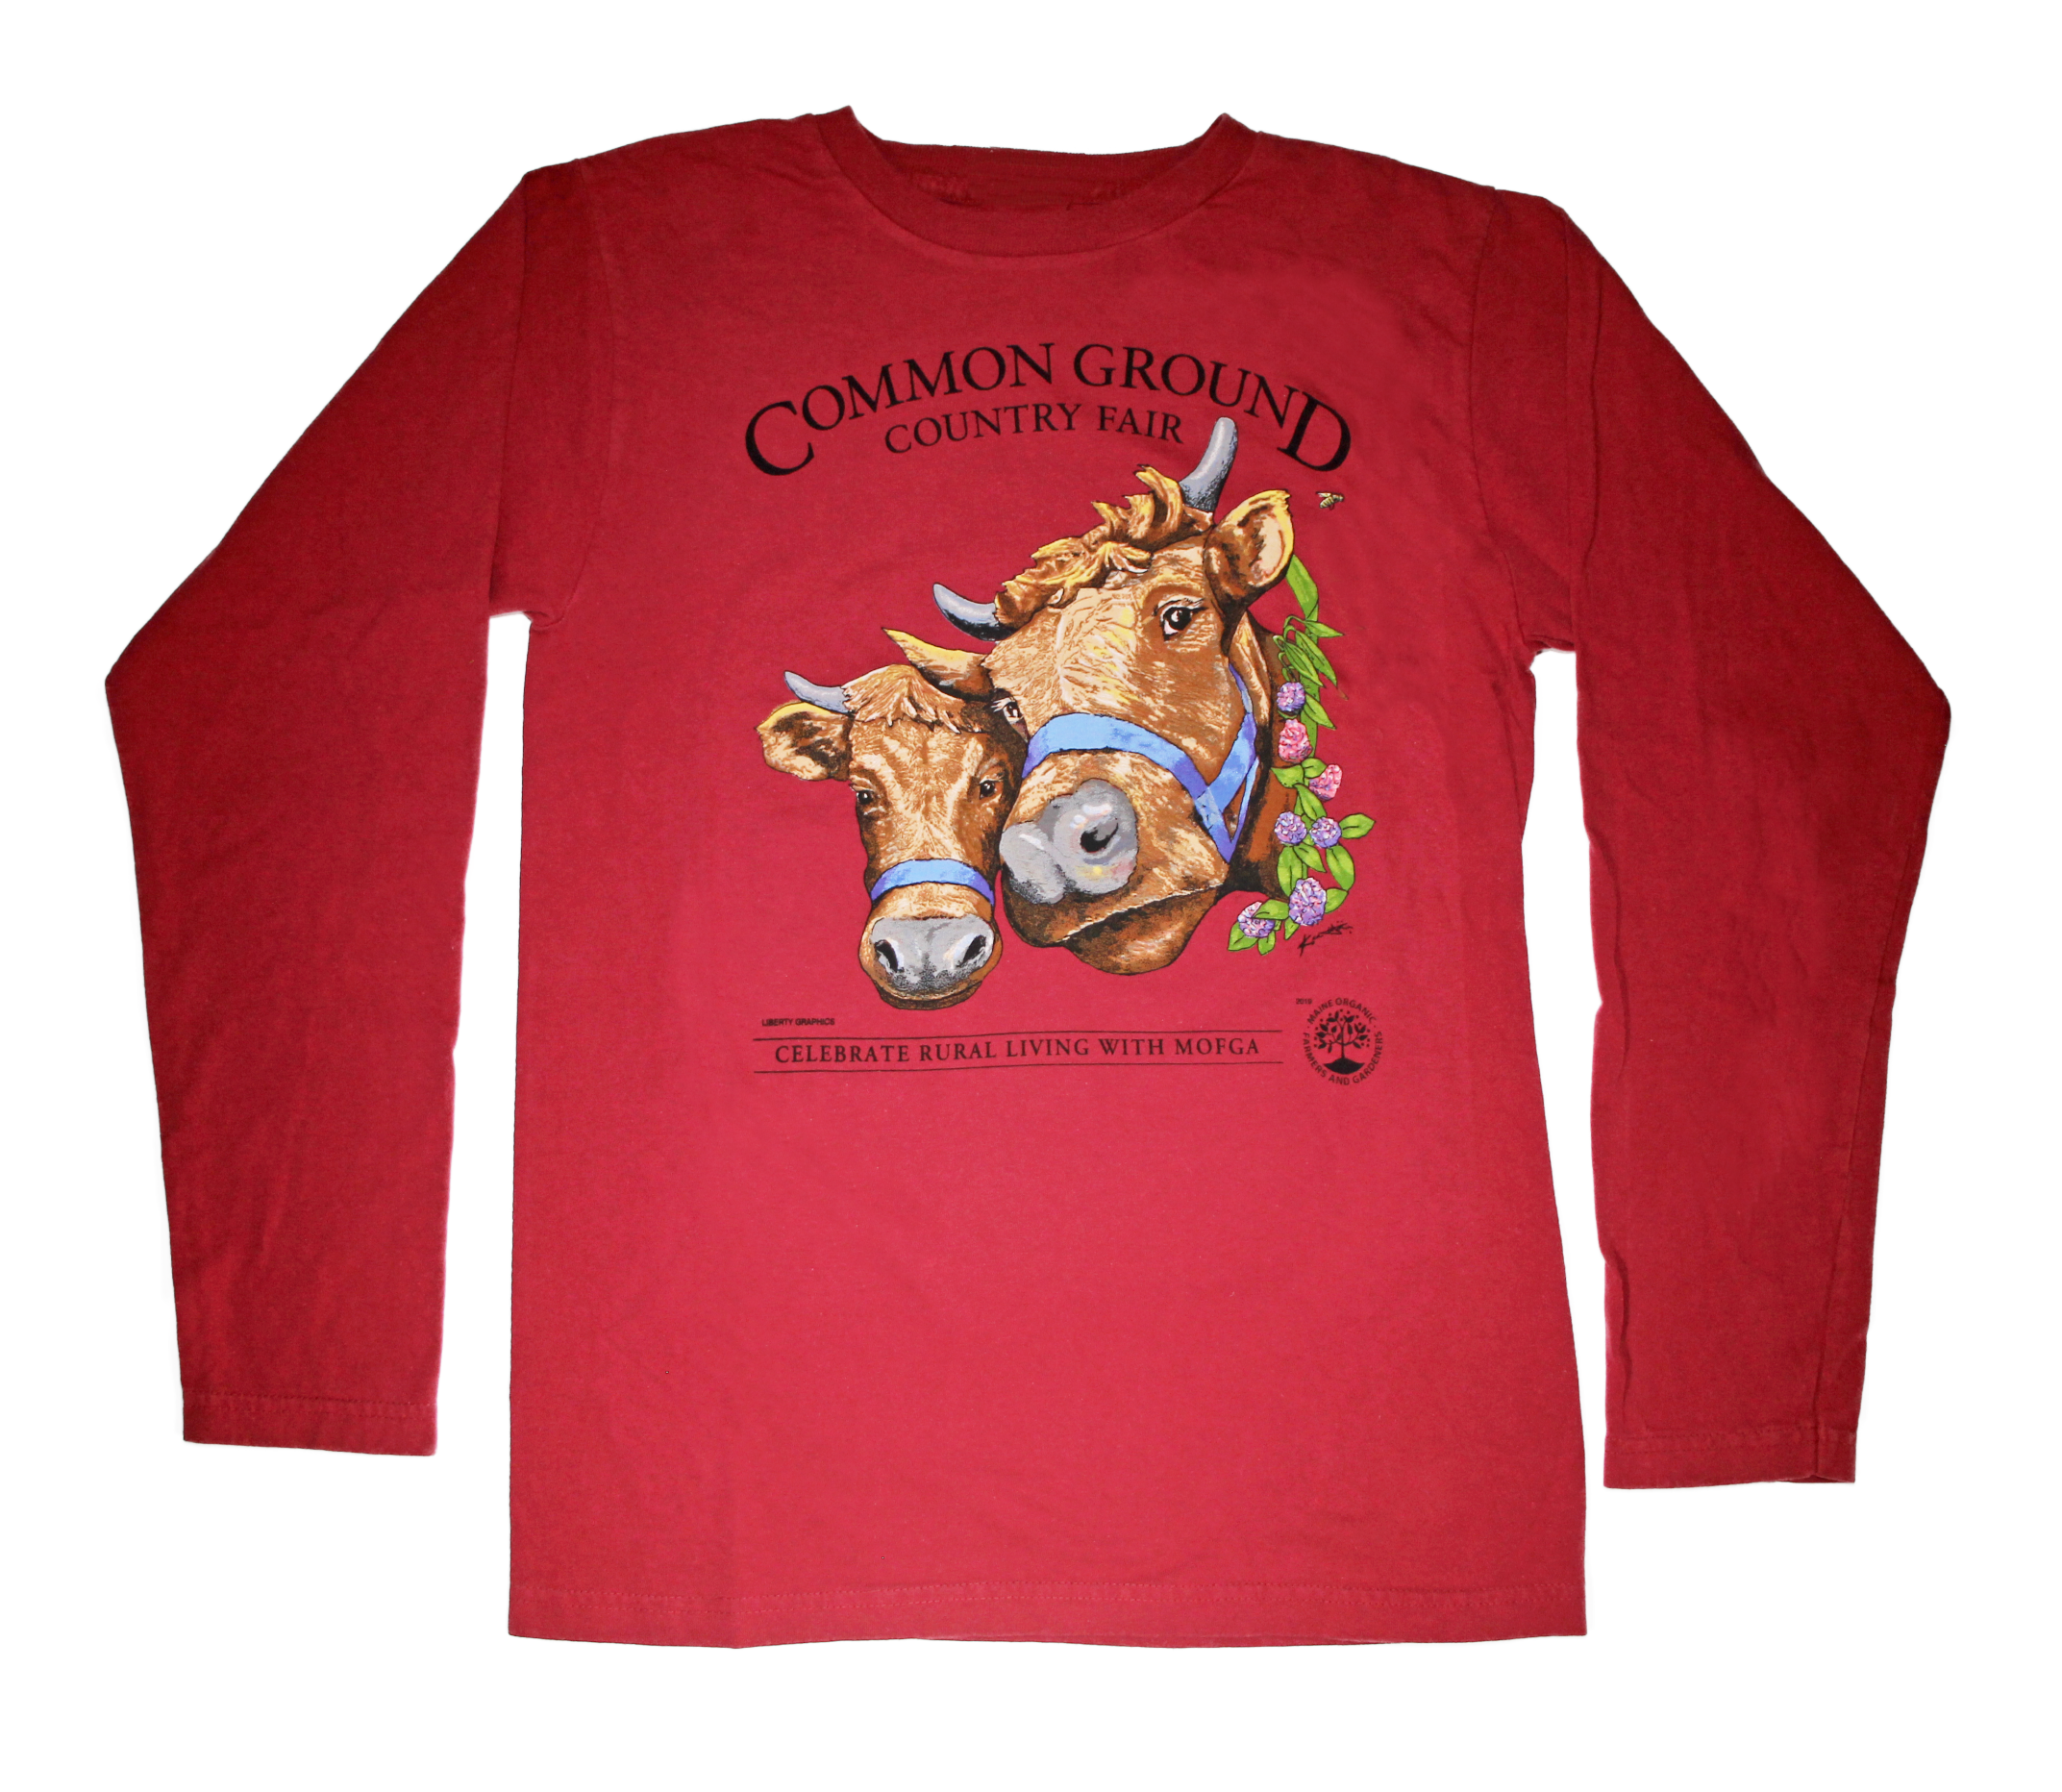 2019 Common Ground Country Fair Adult Long-sleeve T-shirt. Dexter Heifers design. Color red cedar or dark red